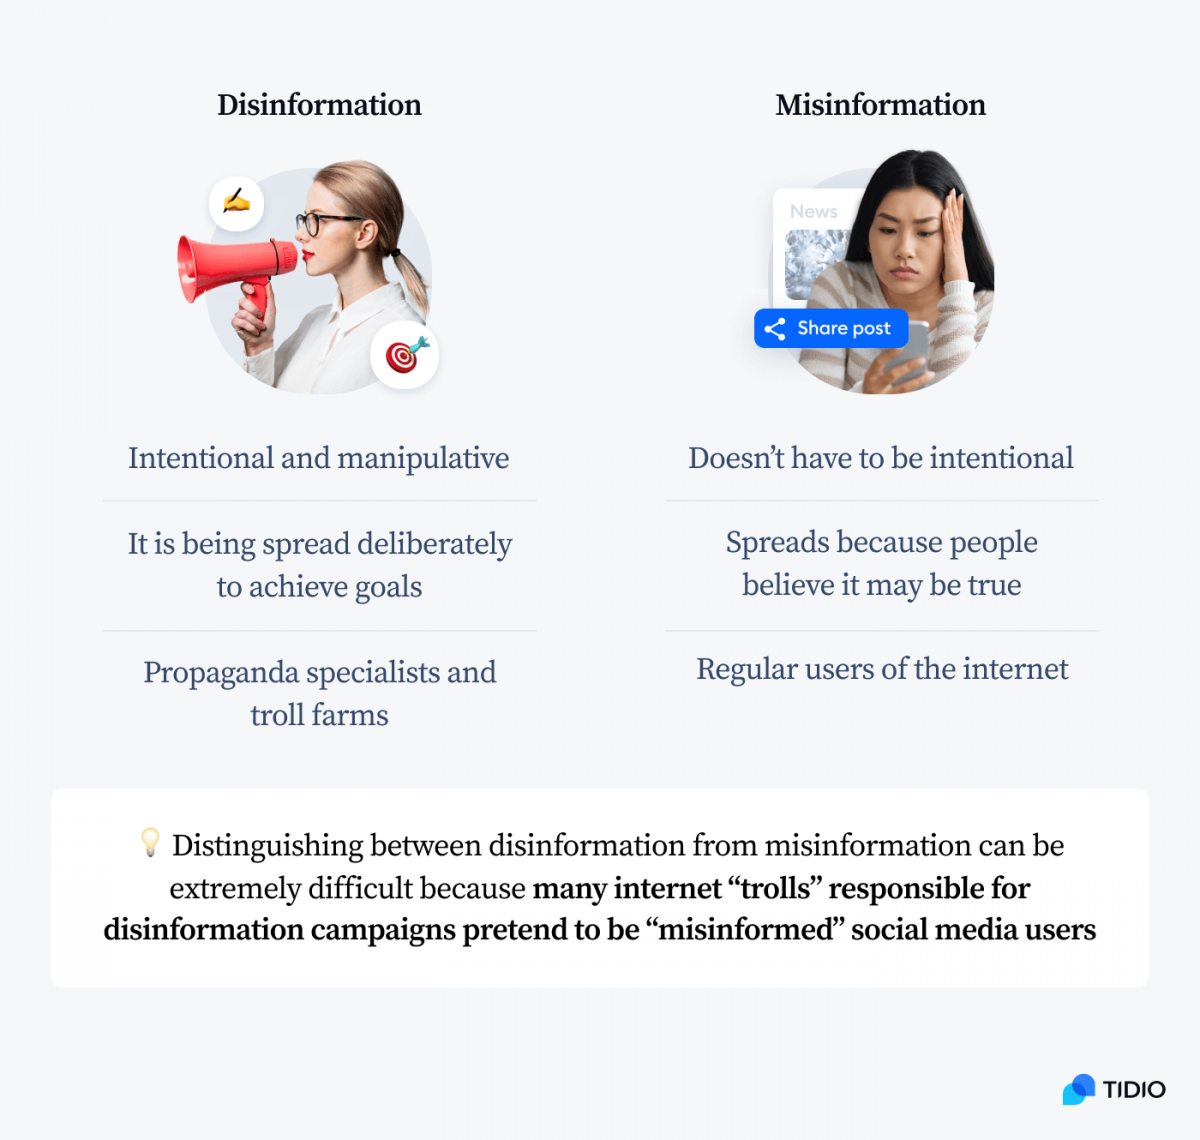 Infographic presenting diferences between disinformation and misinformation